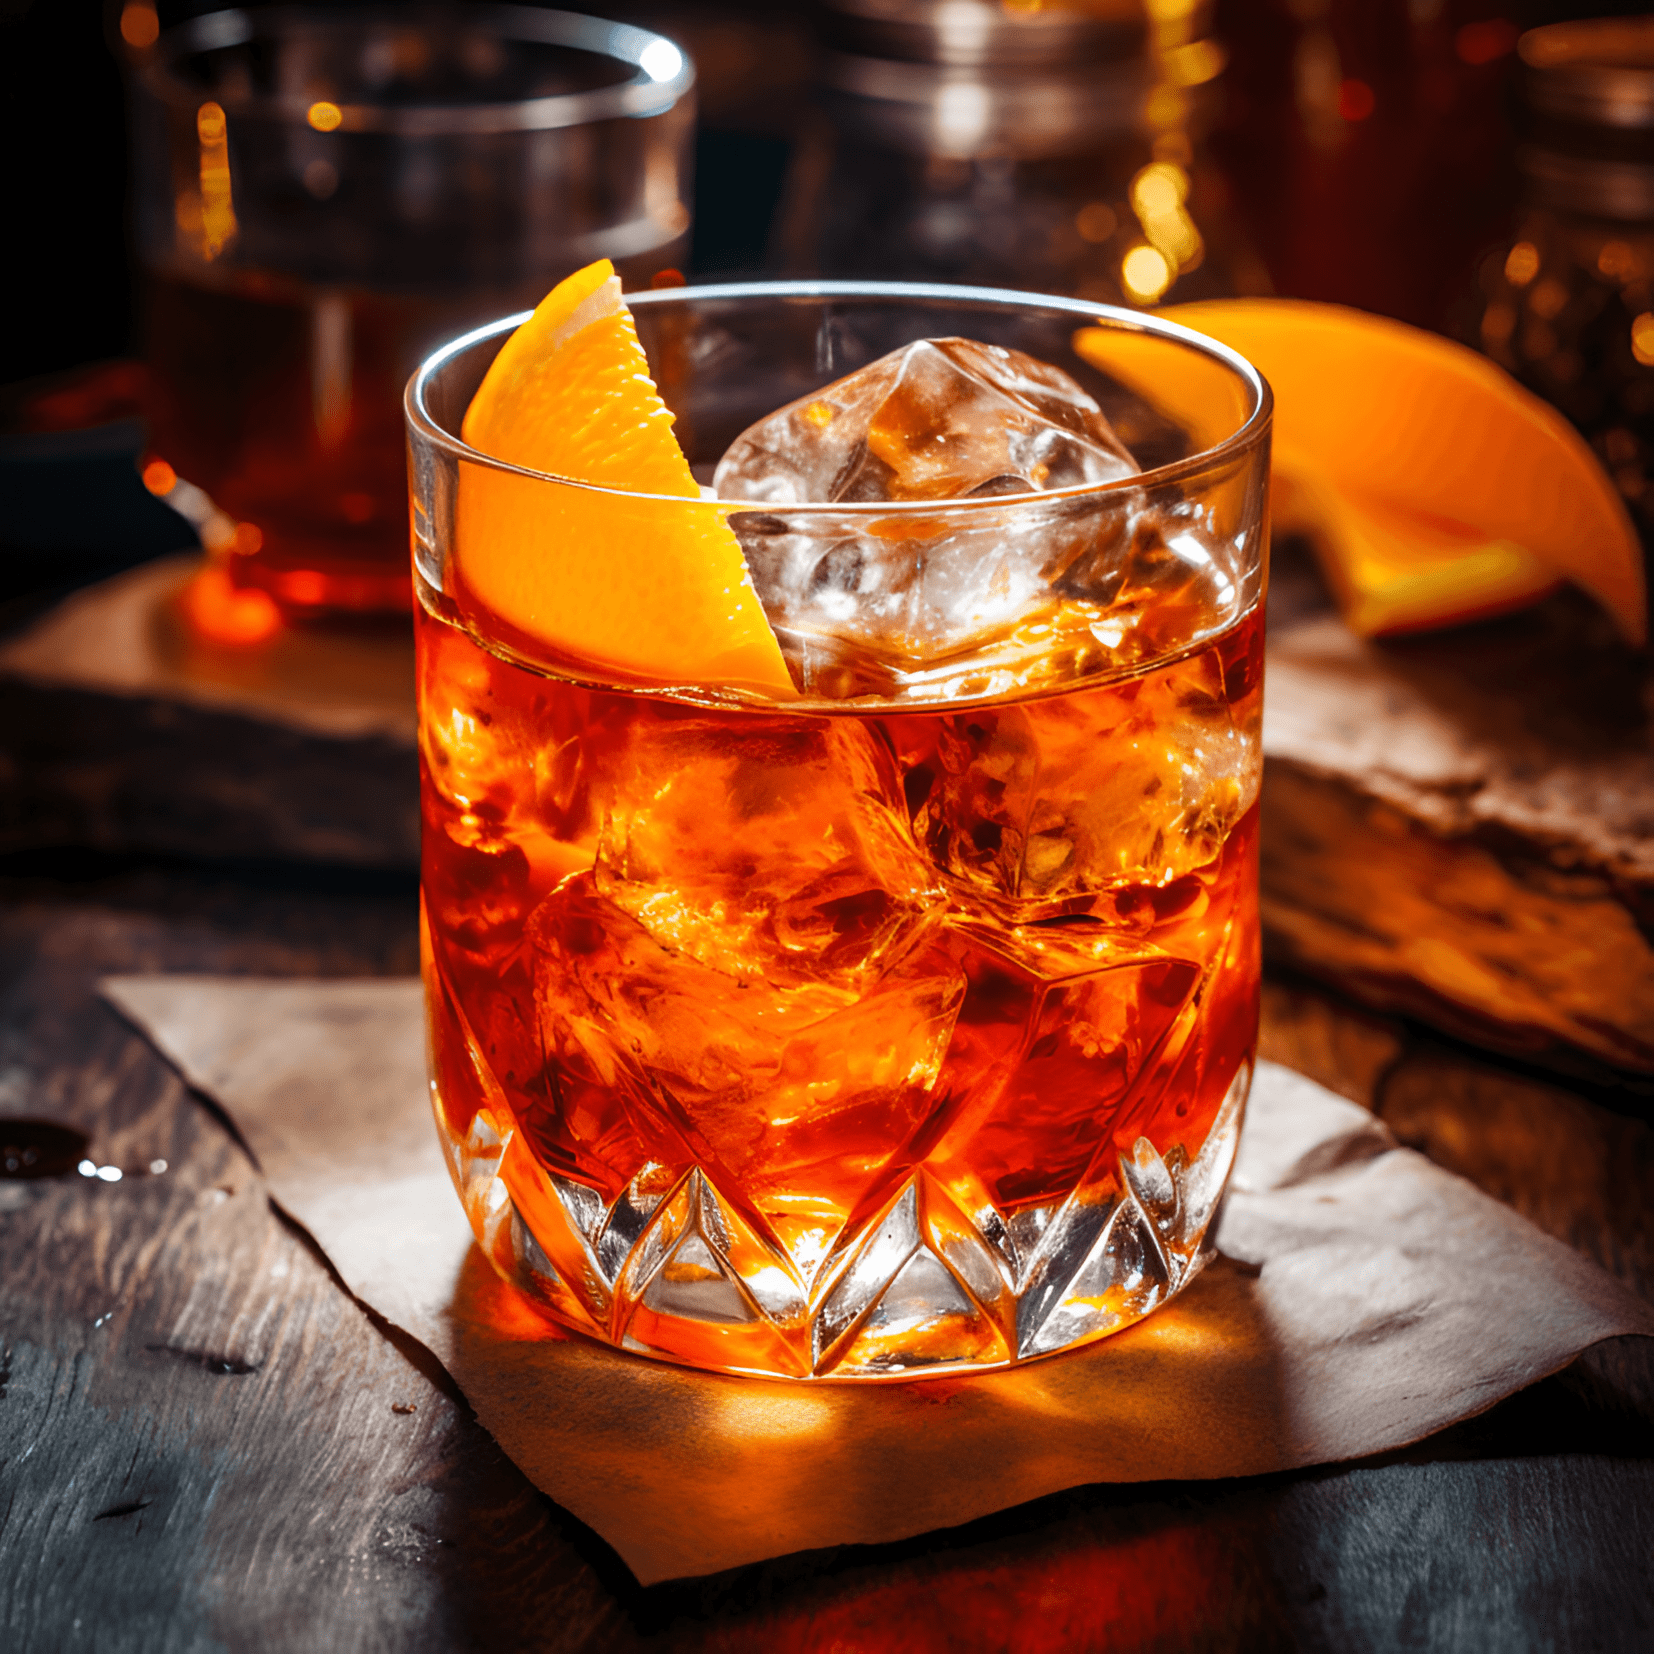 Italian Cocktail Recipe - The Italian cocktail has a balanced taste, with a combination of bitter, sweet, and herbal flavors. It has a strong and bold character, with a smooth and slightly dry finish.